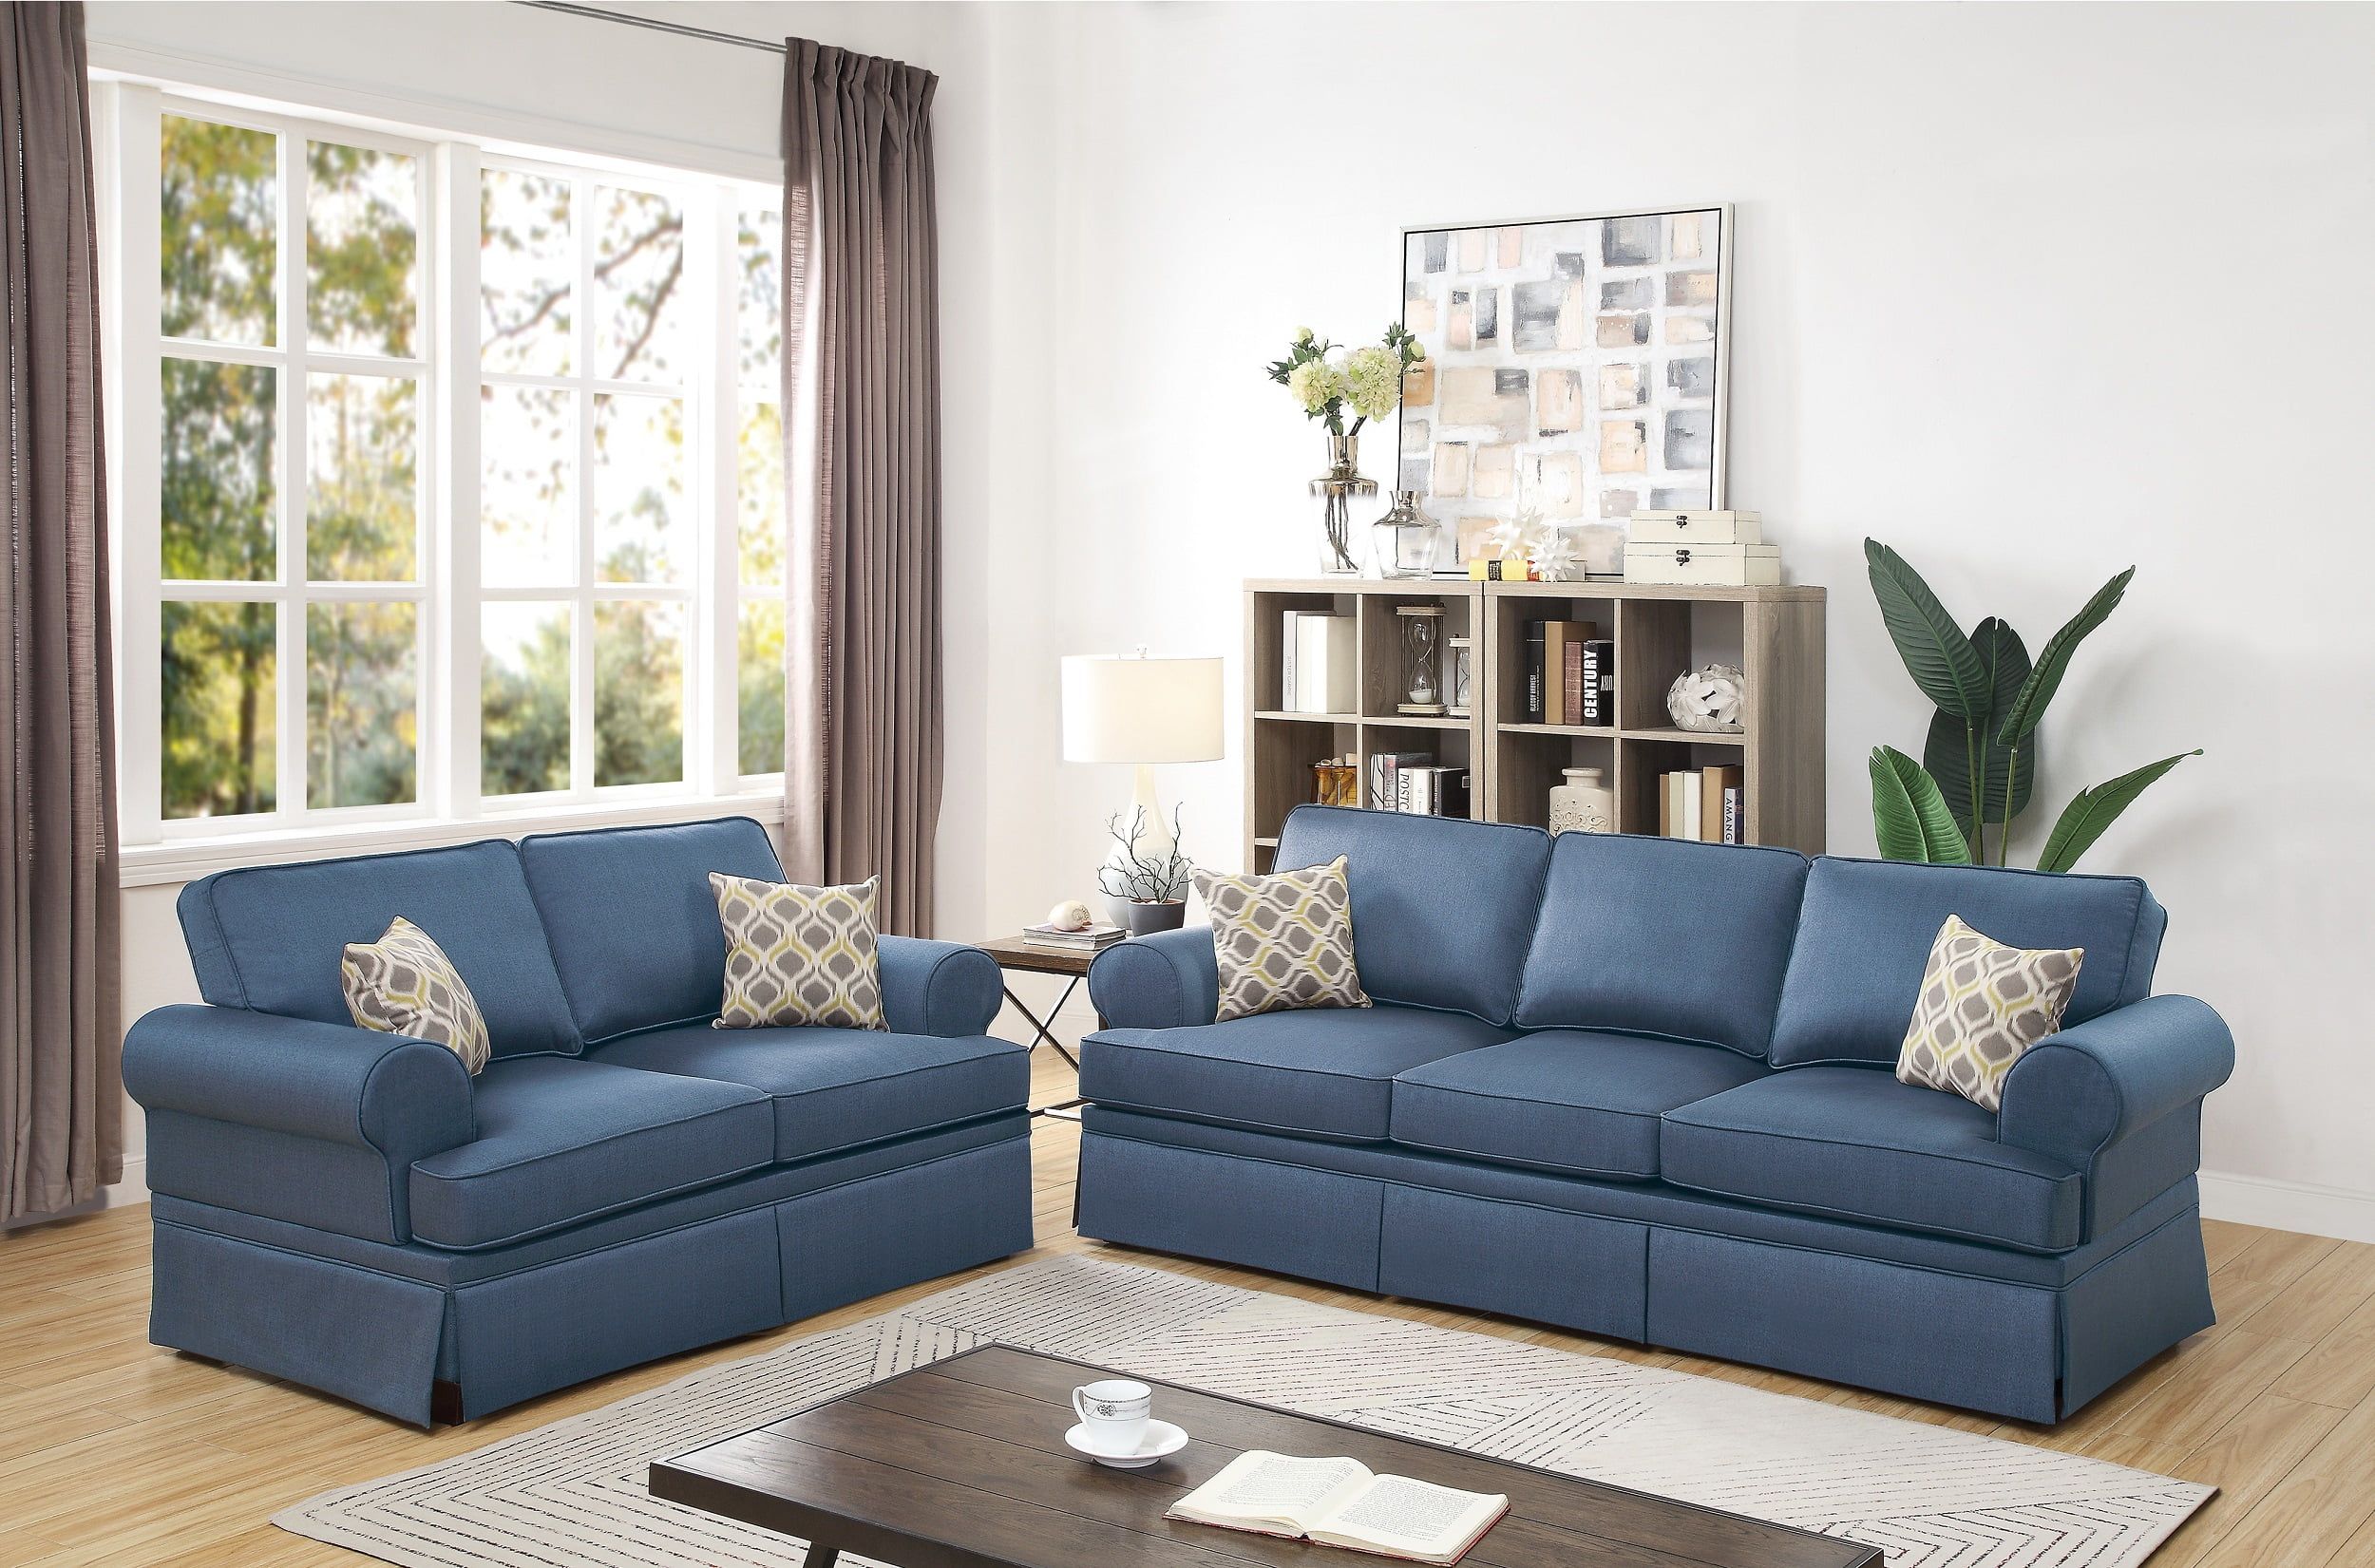 Classic Comfort Cozy Living Room 2pc Sofa Set Sofa And Loveseat Blue Intended For Sofas In Blue (View 9 of 20)